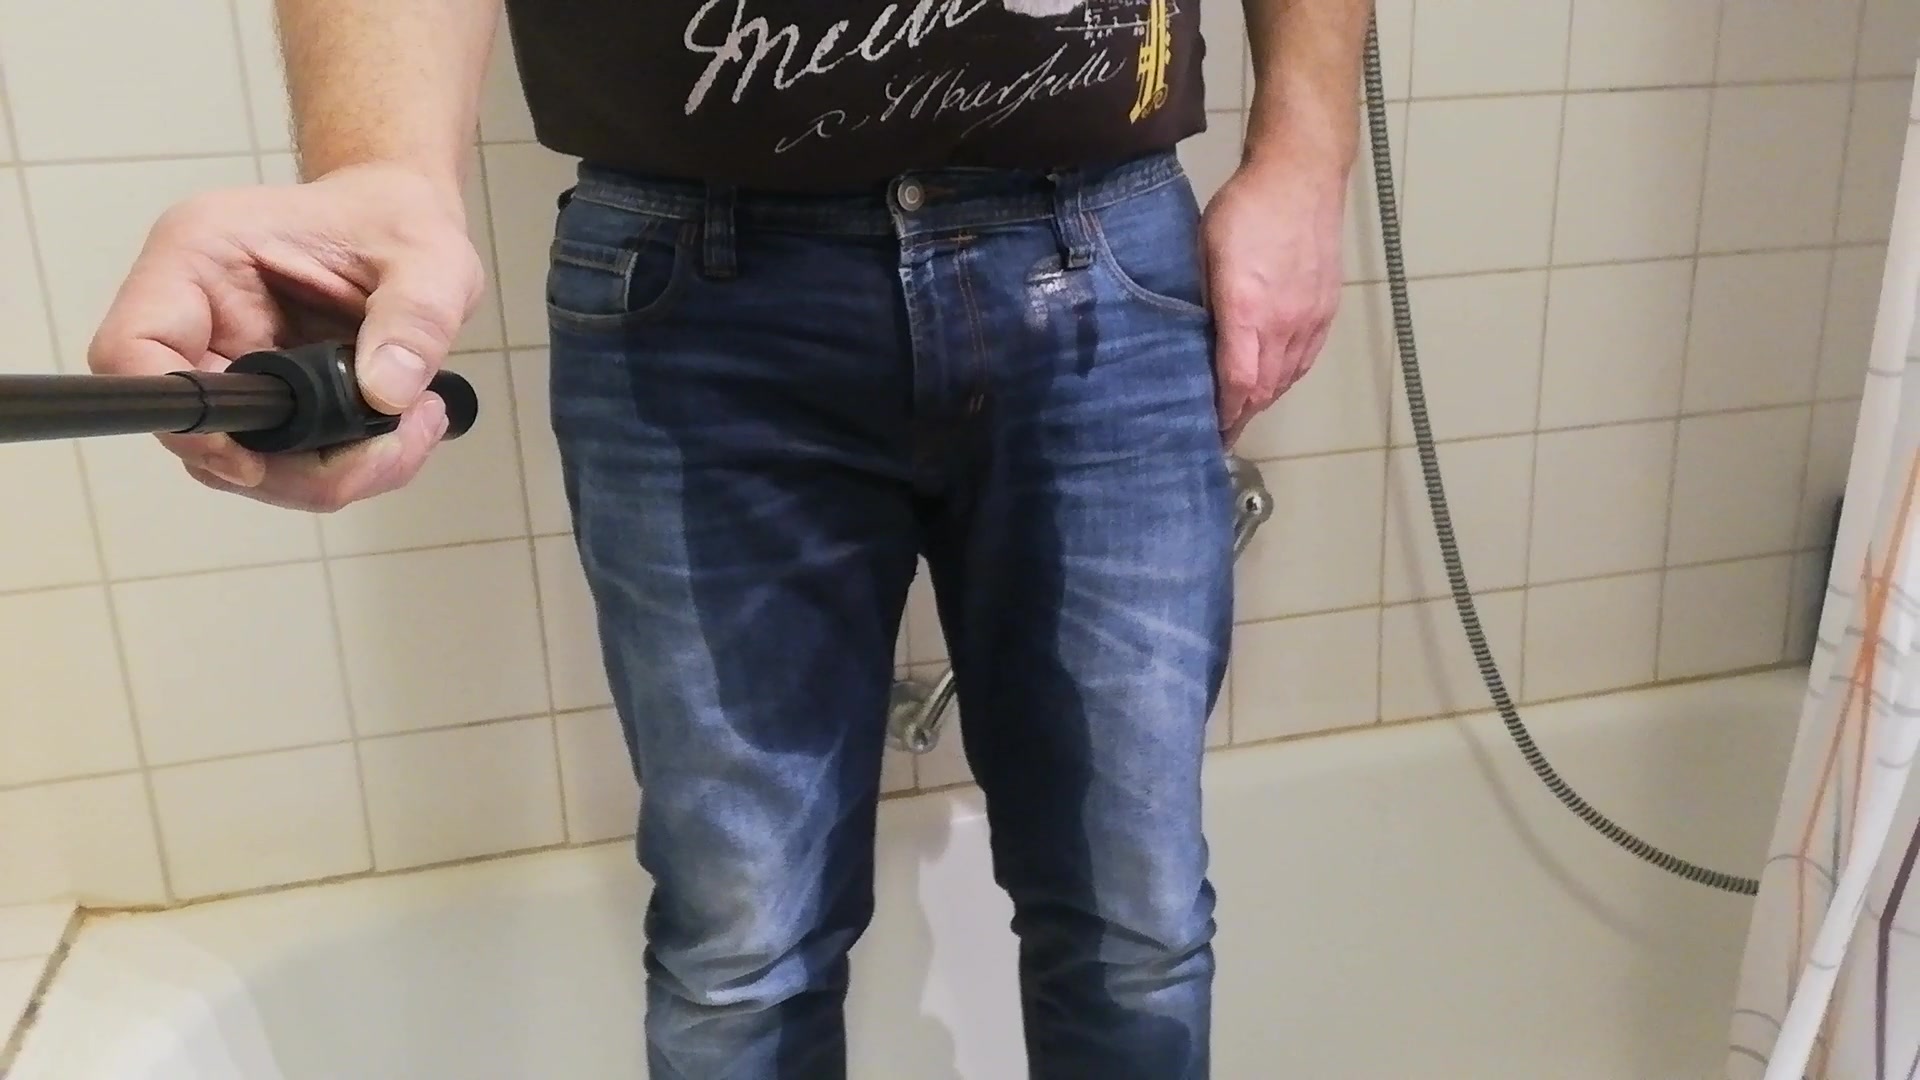 Jeans Piss 2 - video 2